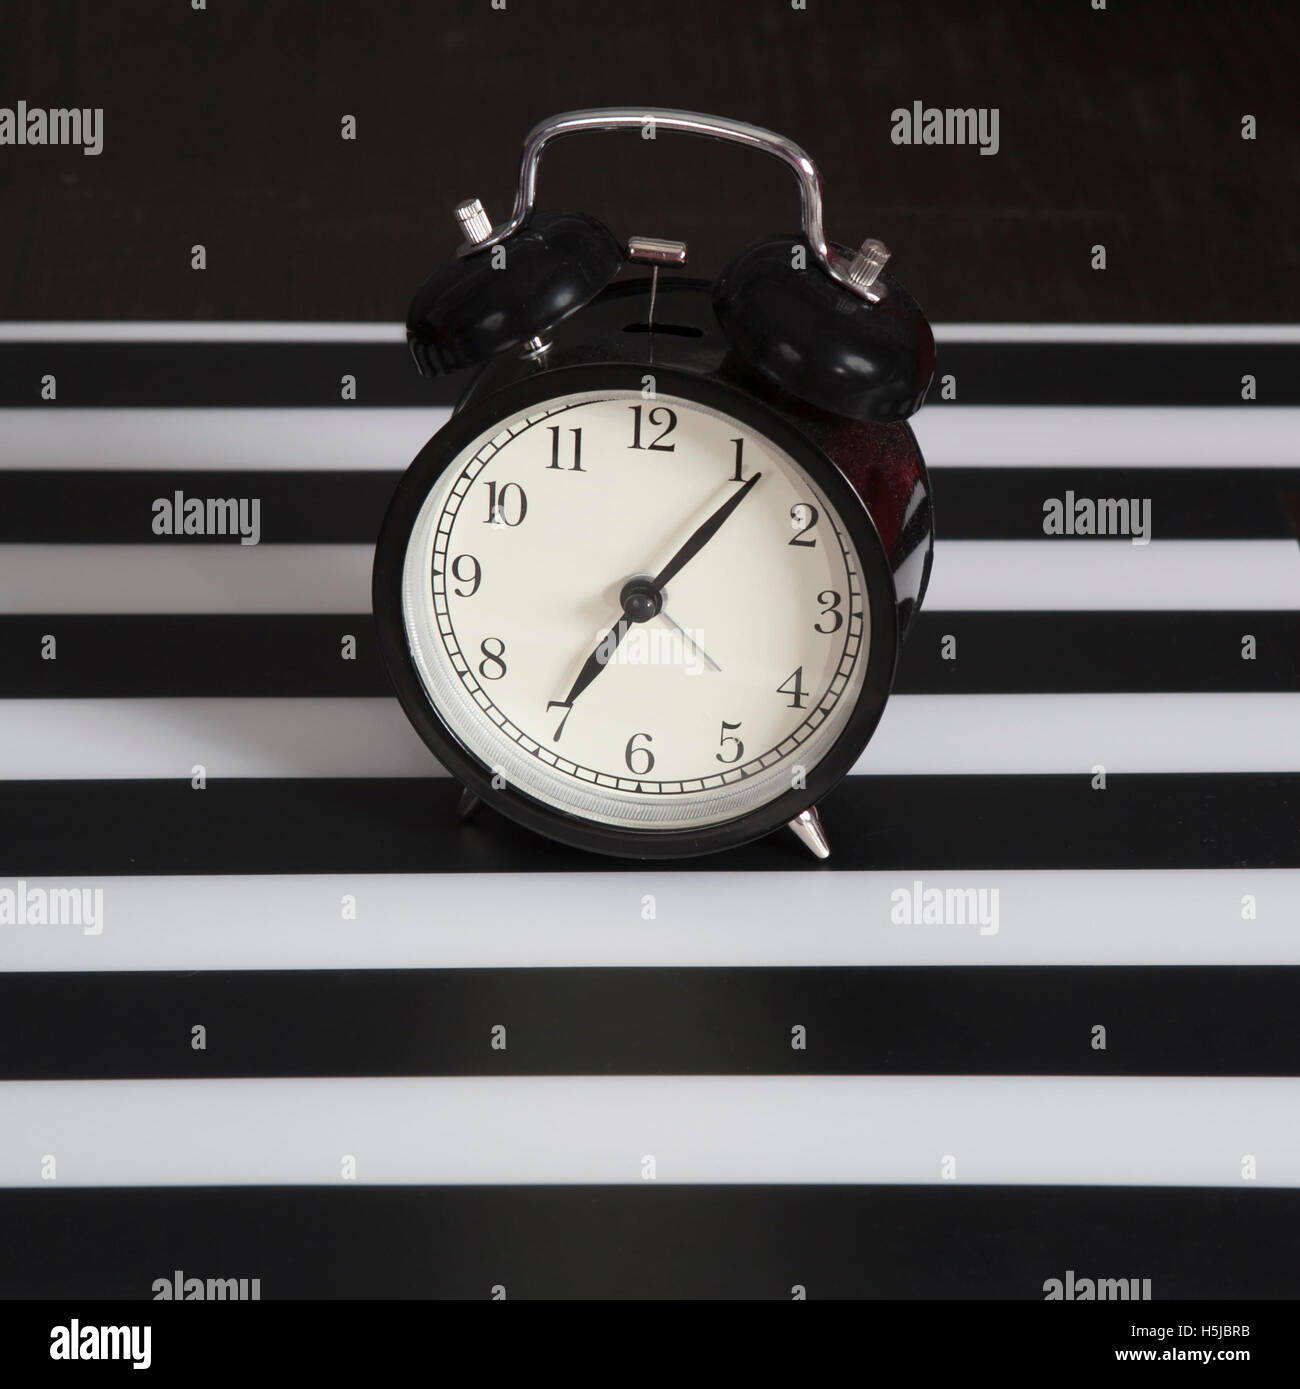 the Black alarm clock on a black and white striped napkin showing 7 o'clock on a bedside table Stock Photo